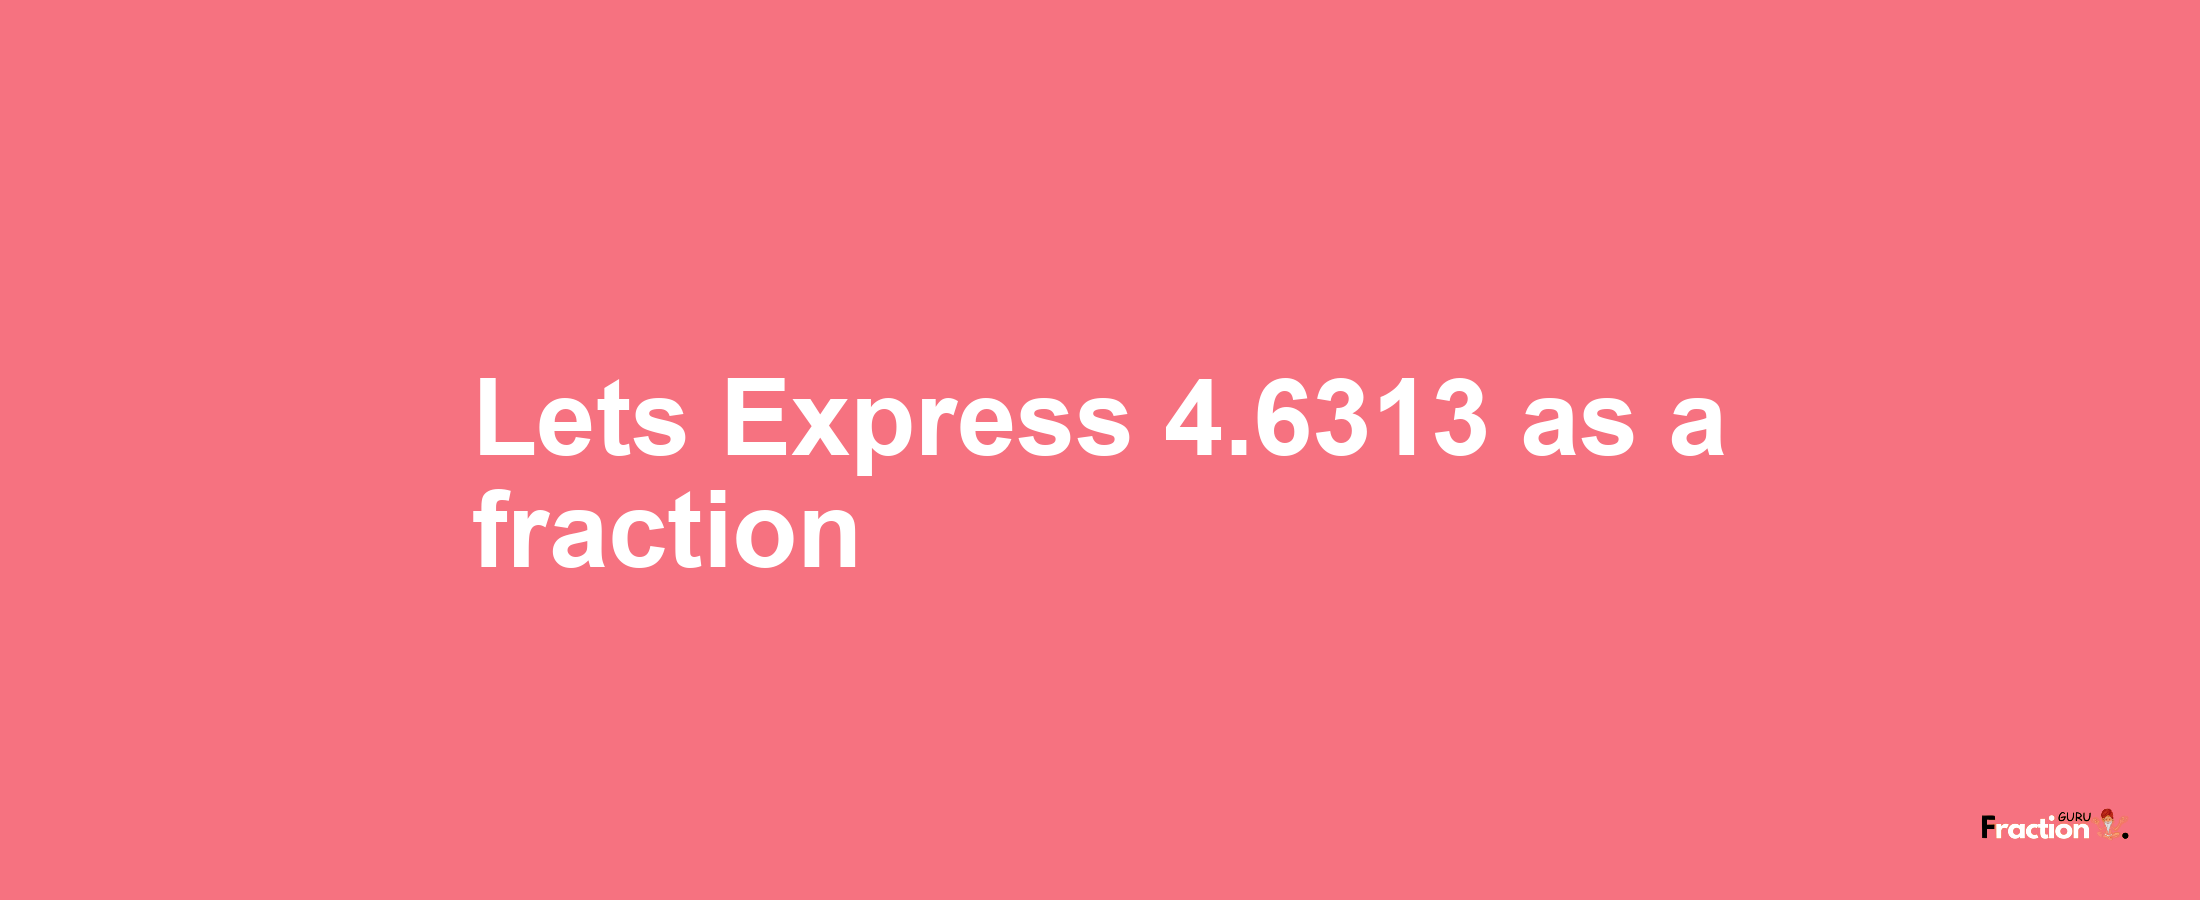 Lets Express 4.6313 as afraction